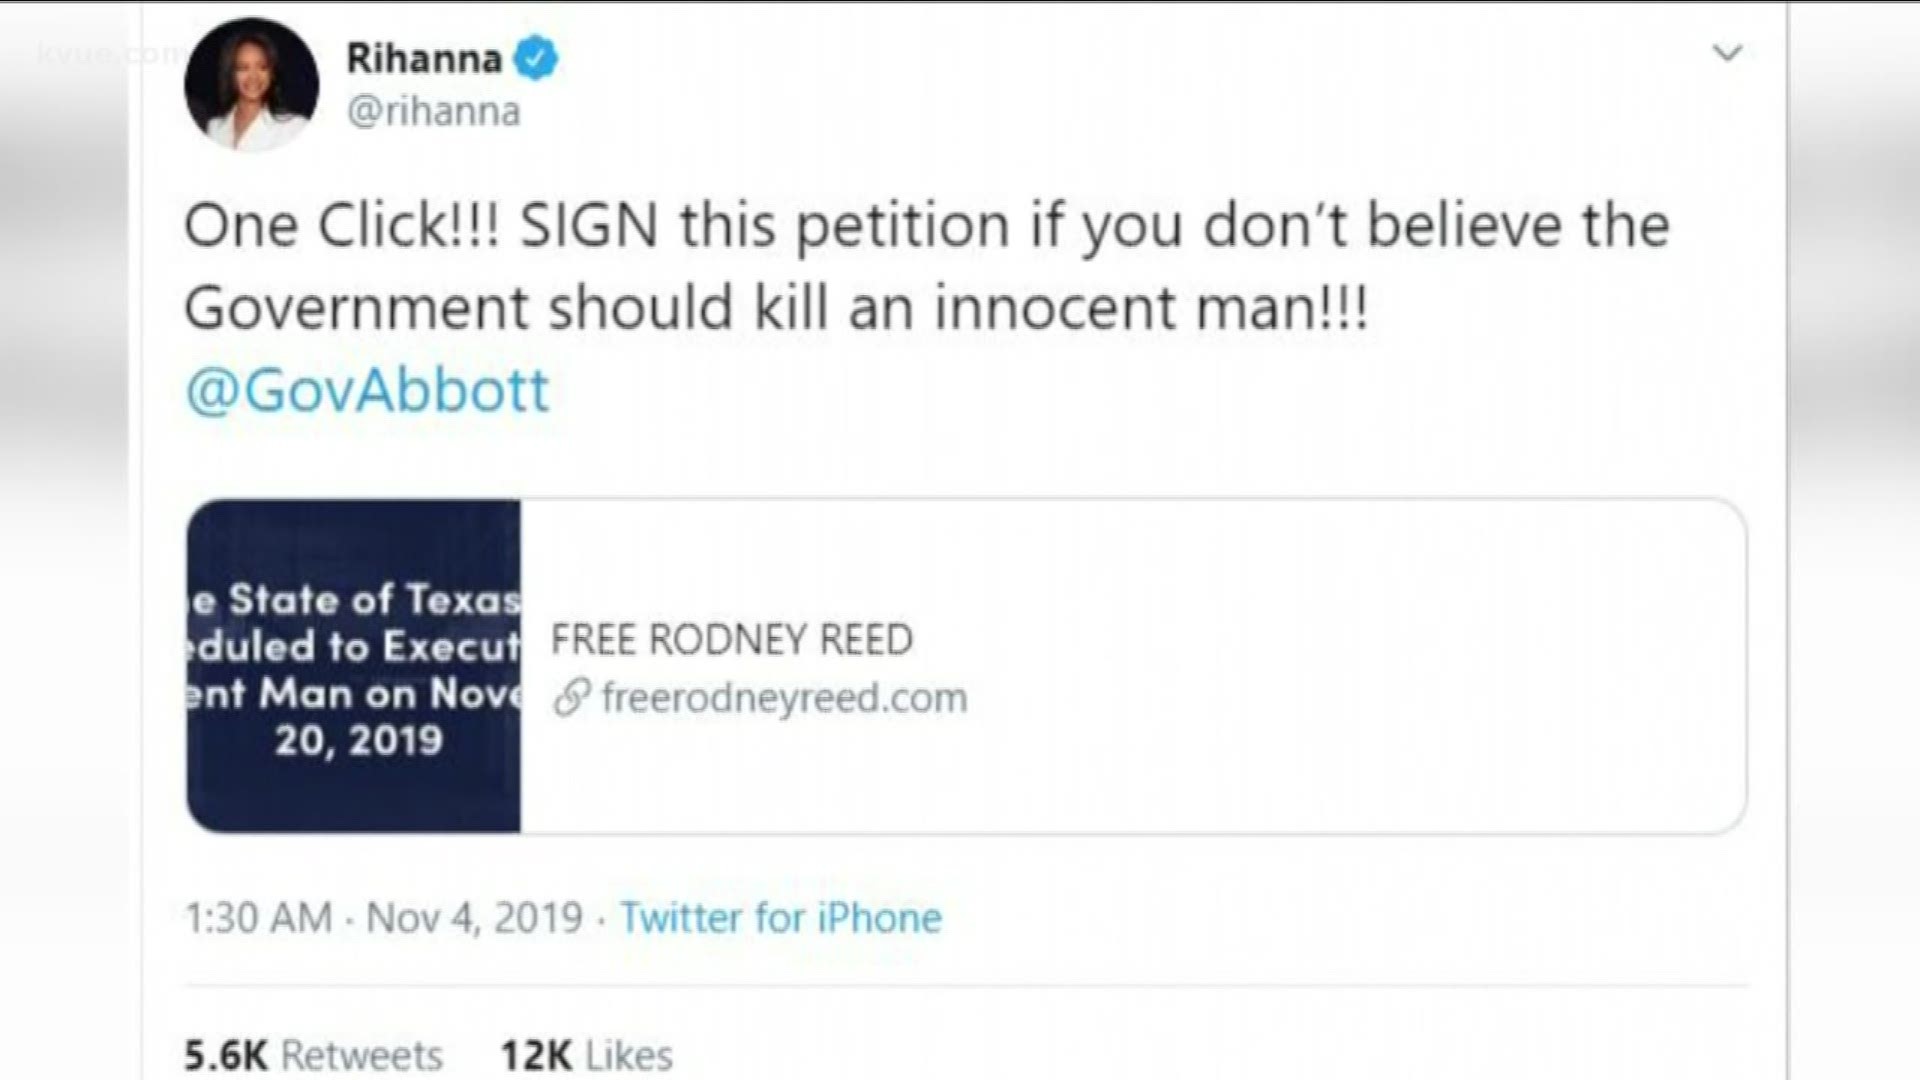 More celebrities are asking the public to sign a petition to stop Rodney Reed's execution.